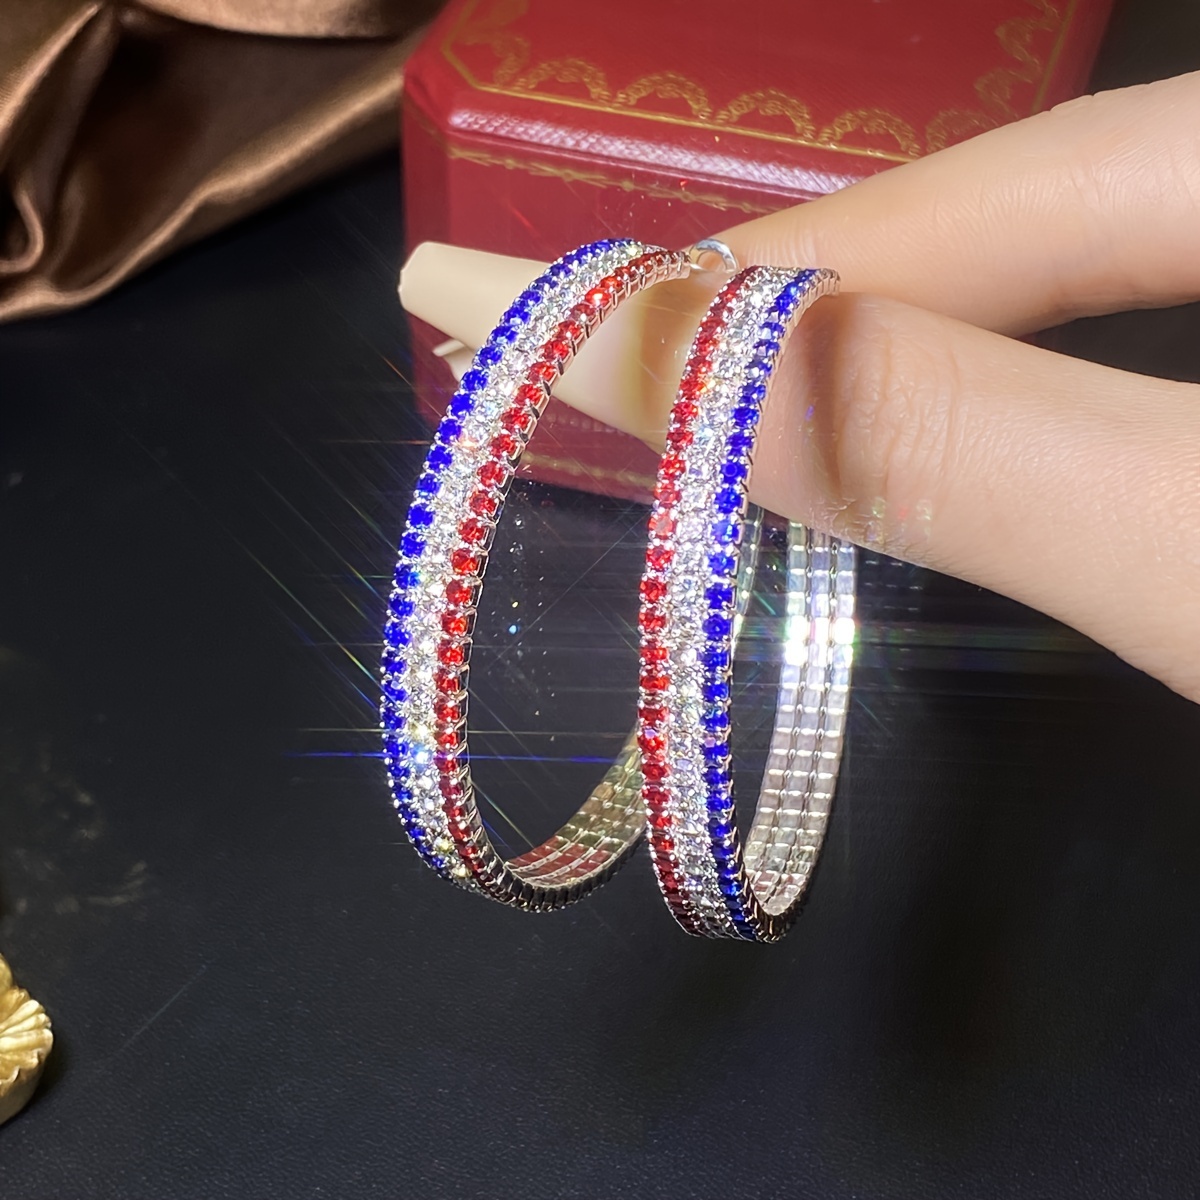 

1 Pair Colored With Red, Blue, White Rhinestone Hoop Earrings, Luxurious & Classic Style, Sparkling Fashion Jewelry For Women, Idea Gift For Friend, Lover